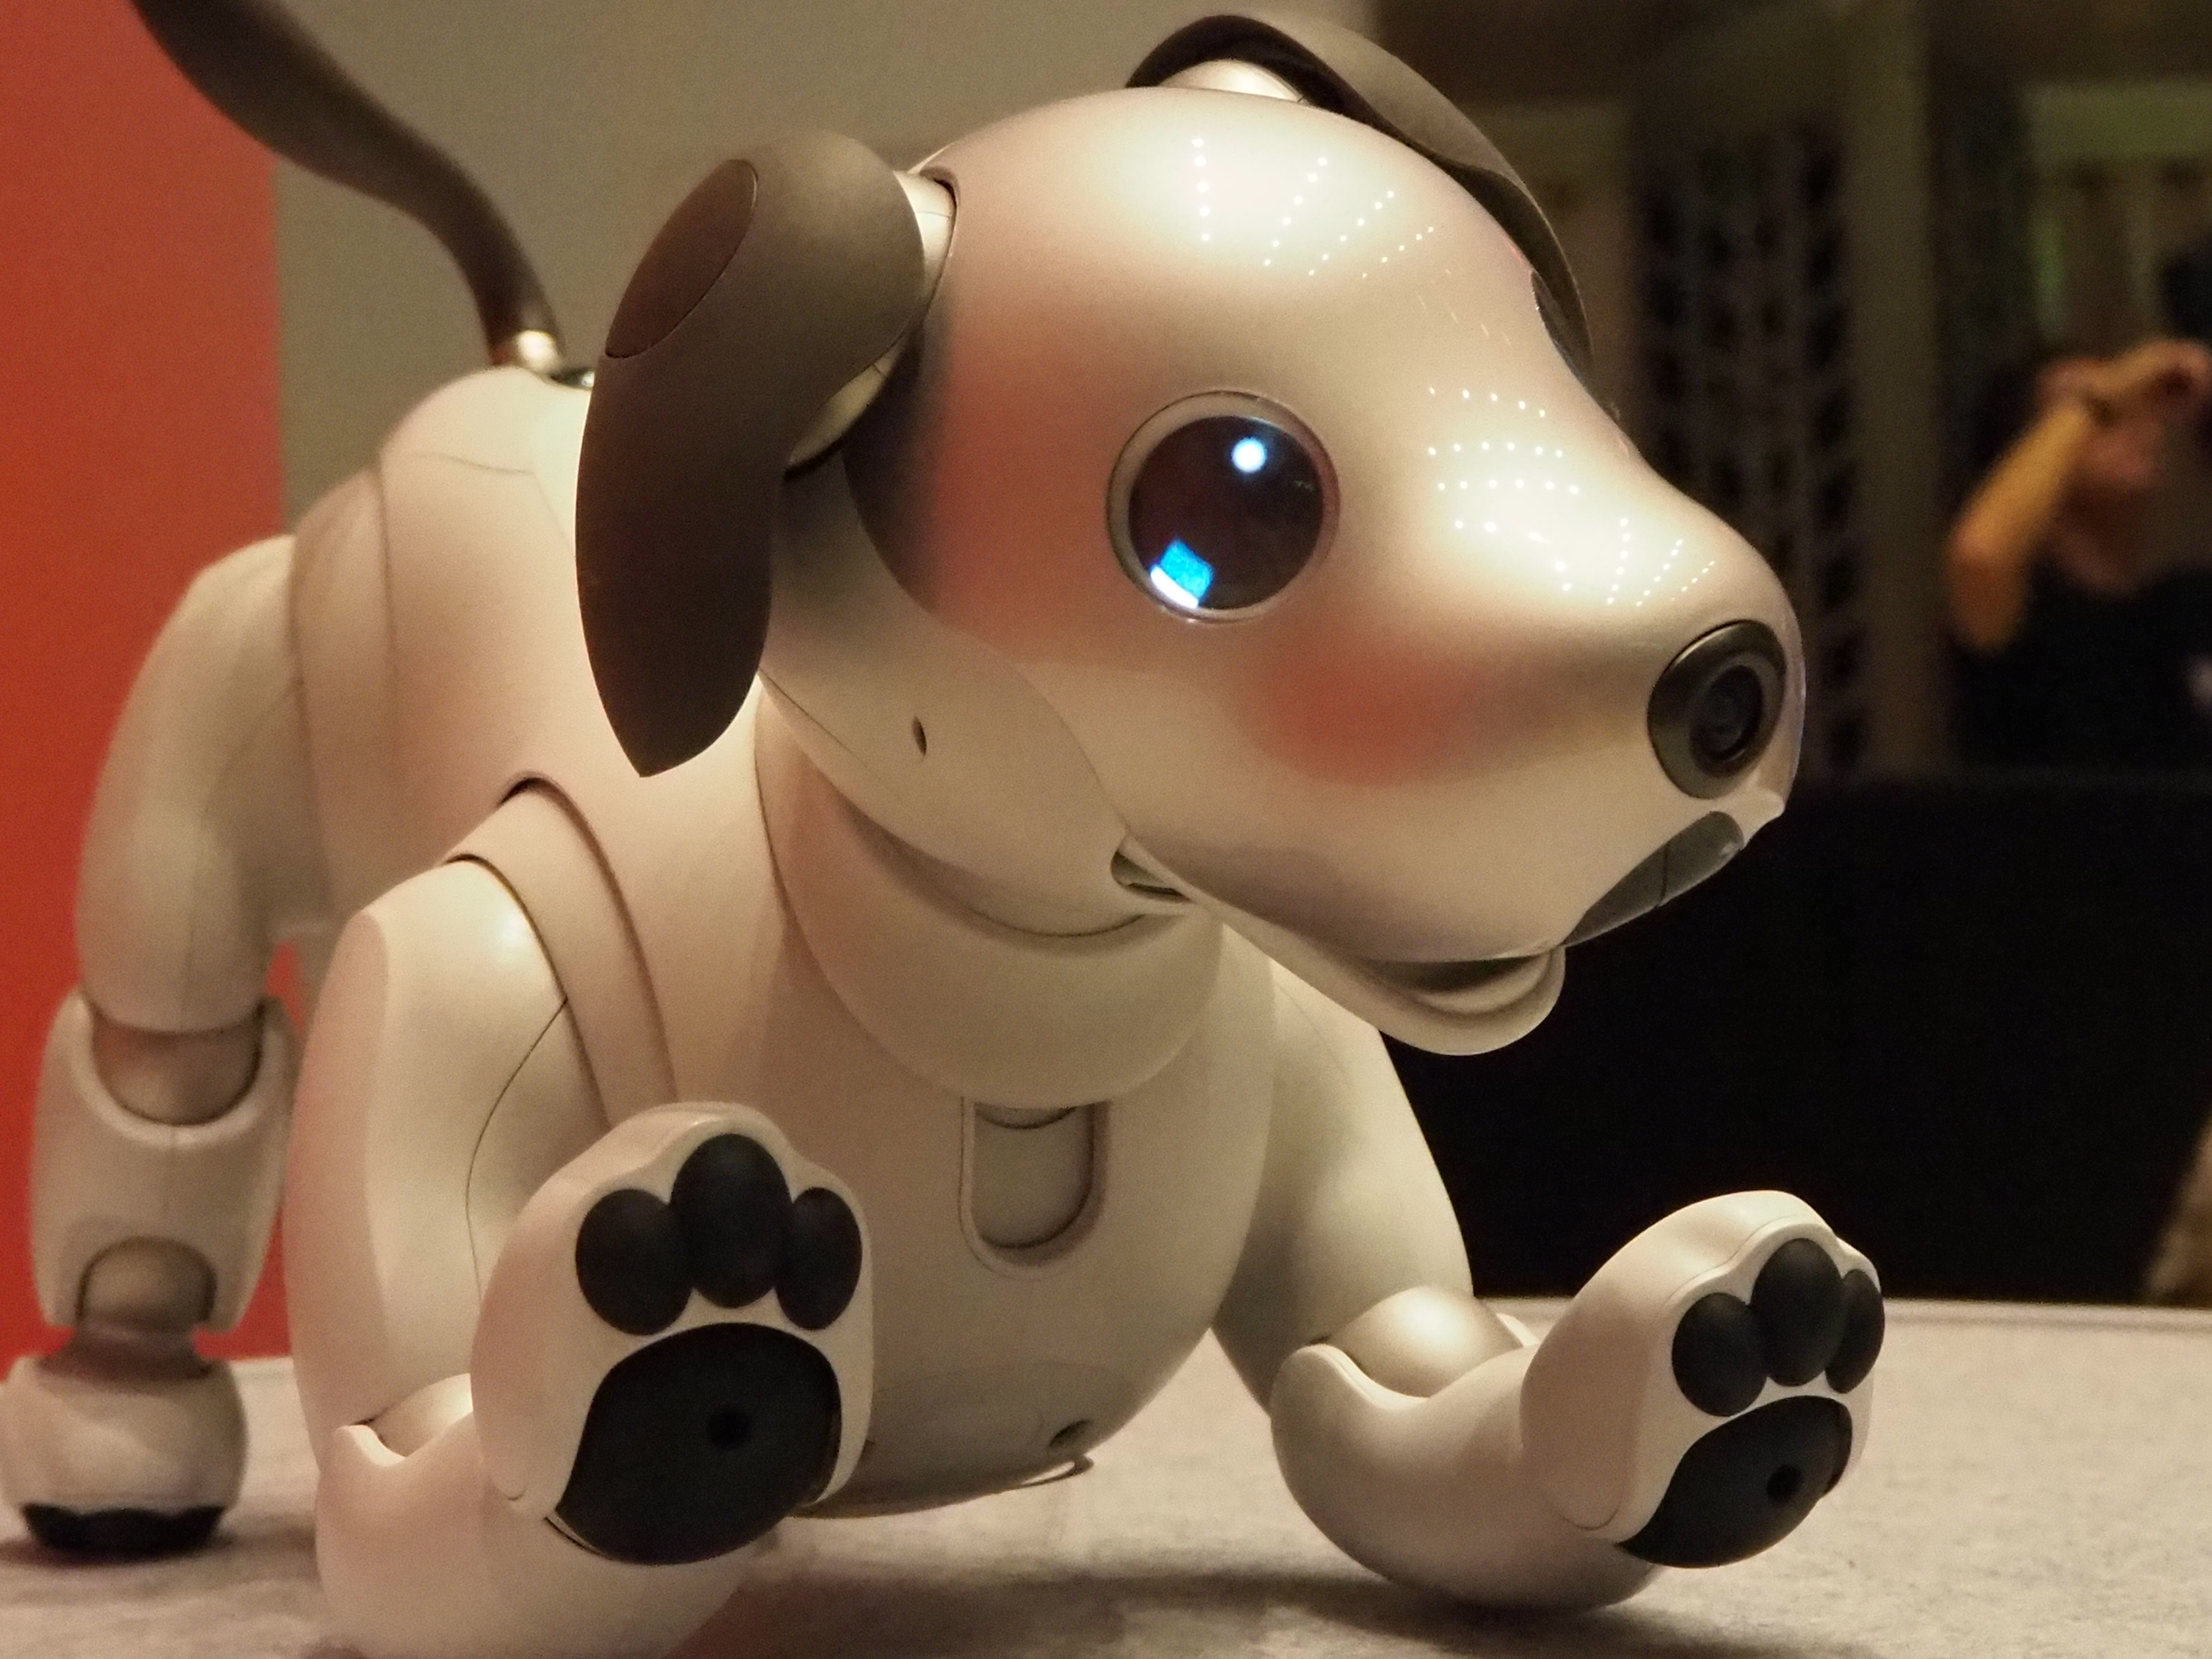 limited First Litter Edition Aibo